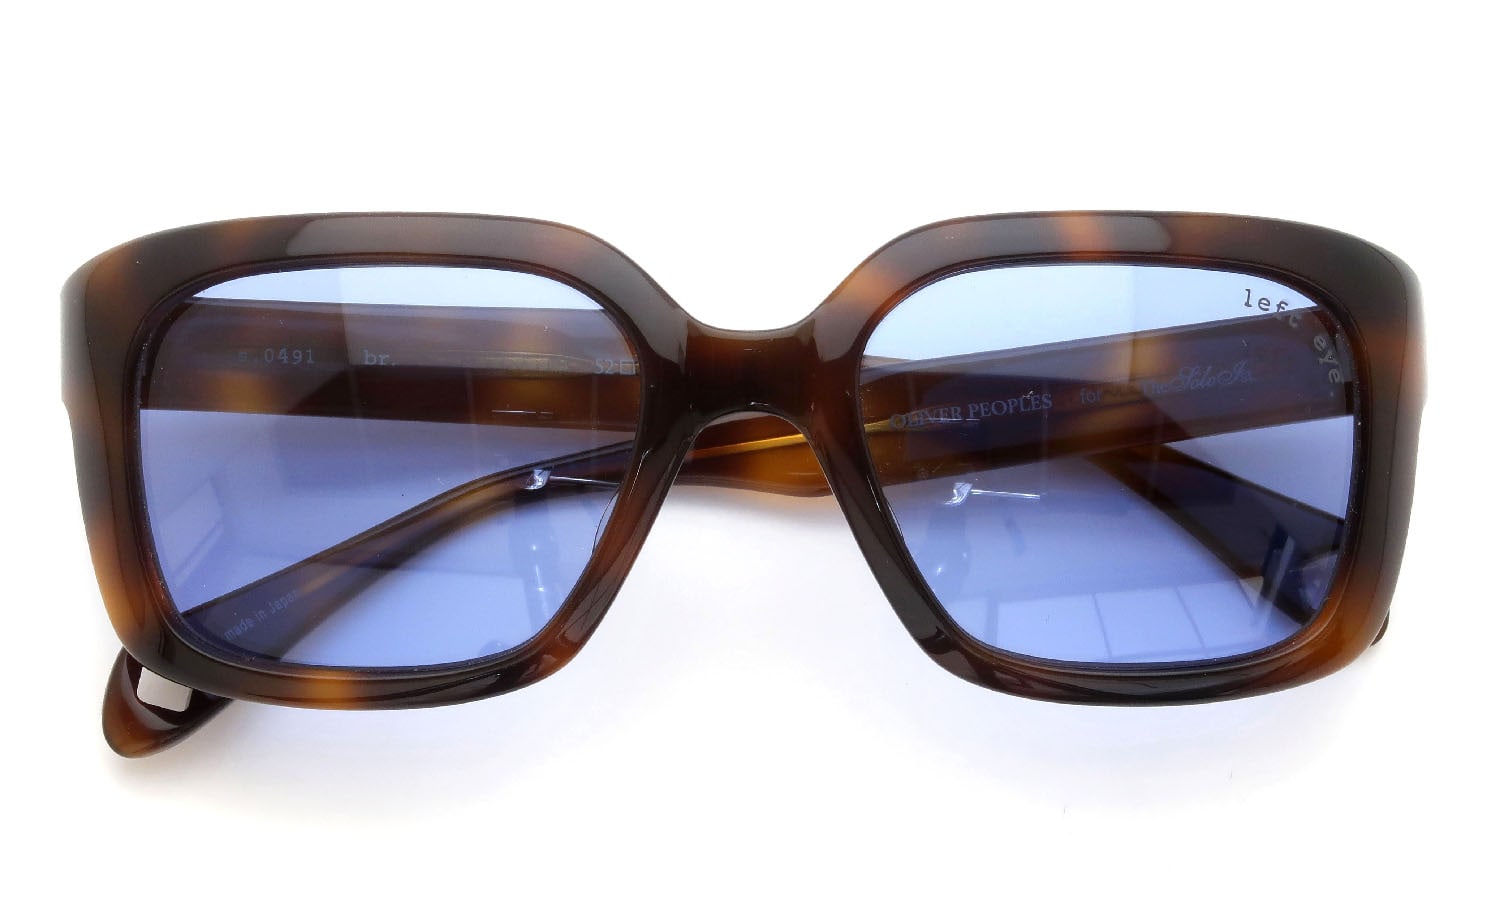 OLIVER PEOPLES archive TAKAHIROMIYASHITATheSoloist. s.0491通販 br.  生産：オプテックジャパン期) #001 ポンメガネ